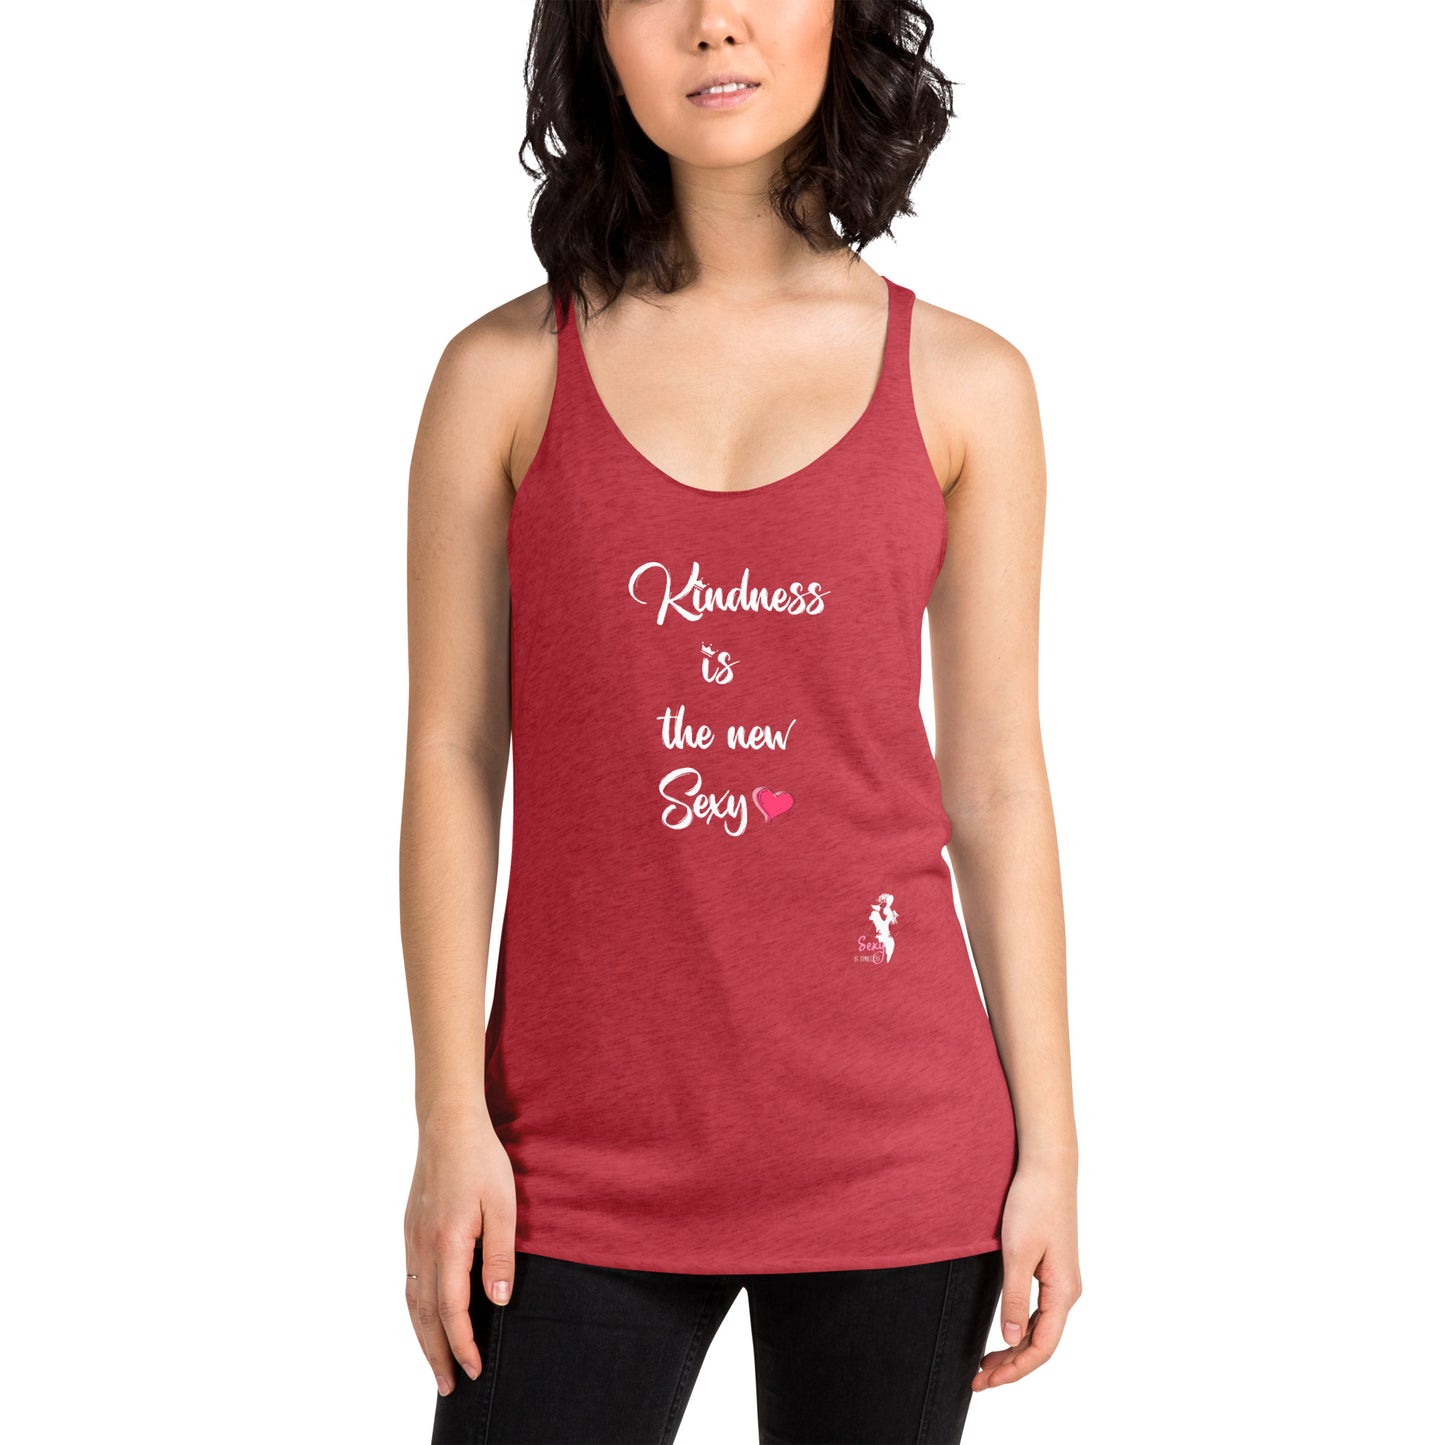 Women's Racerback Tank - Kindness is the new Sexy - Colors